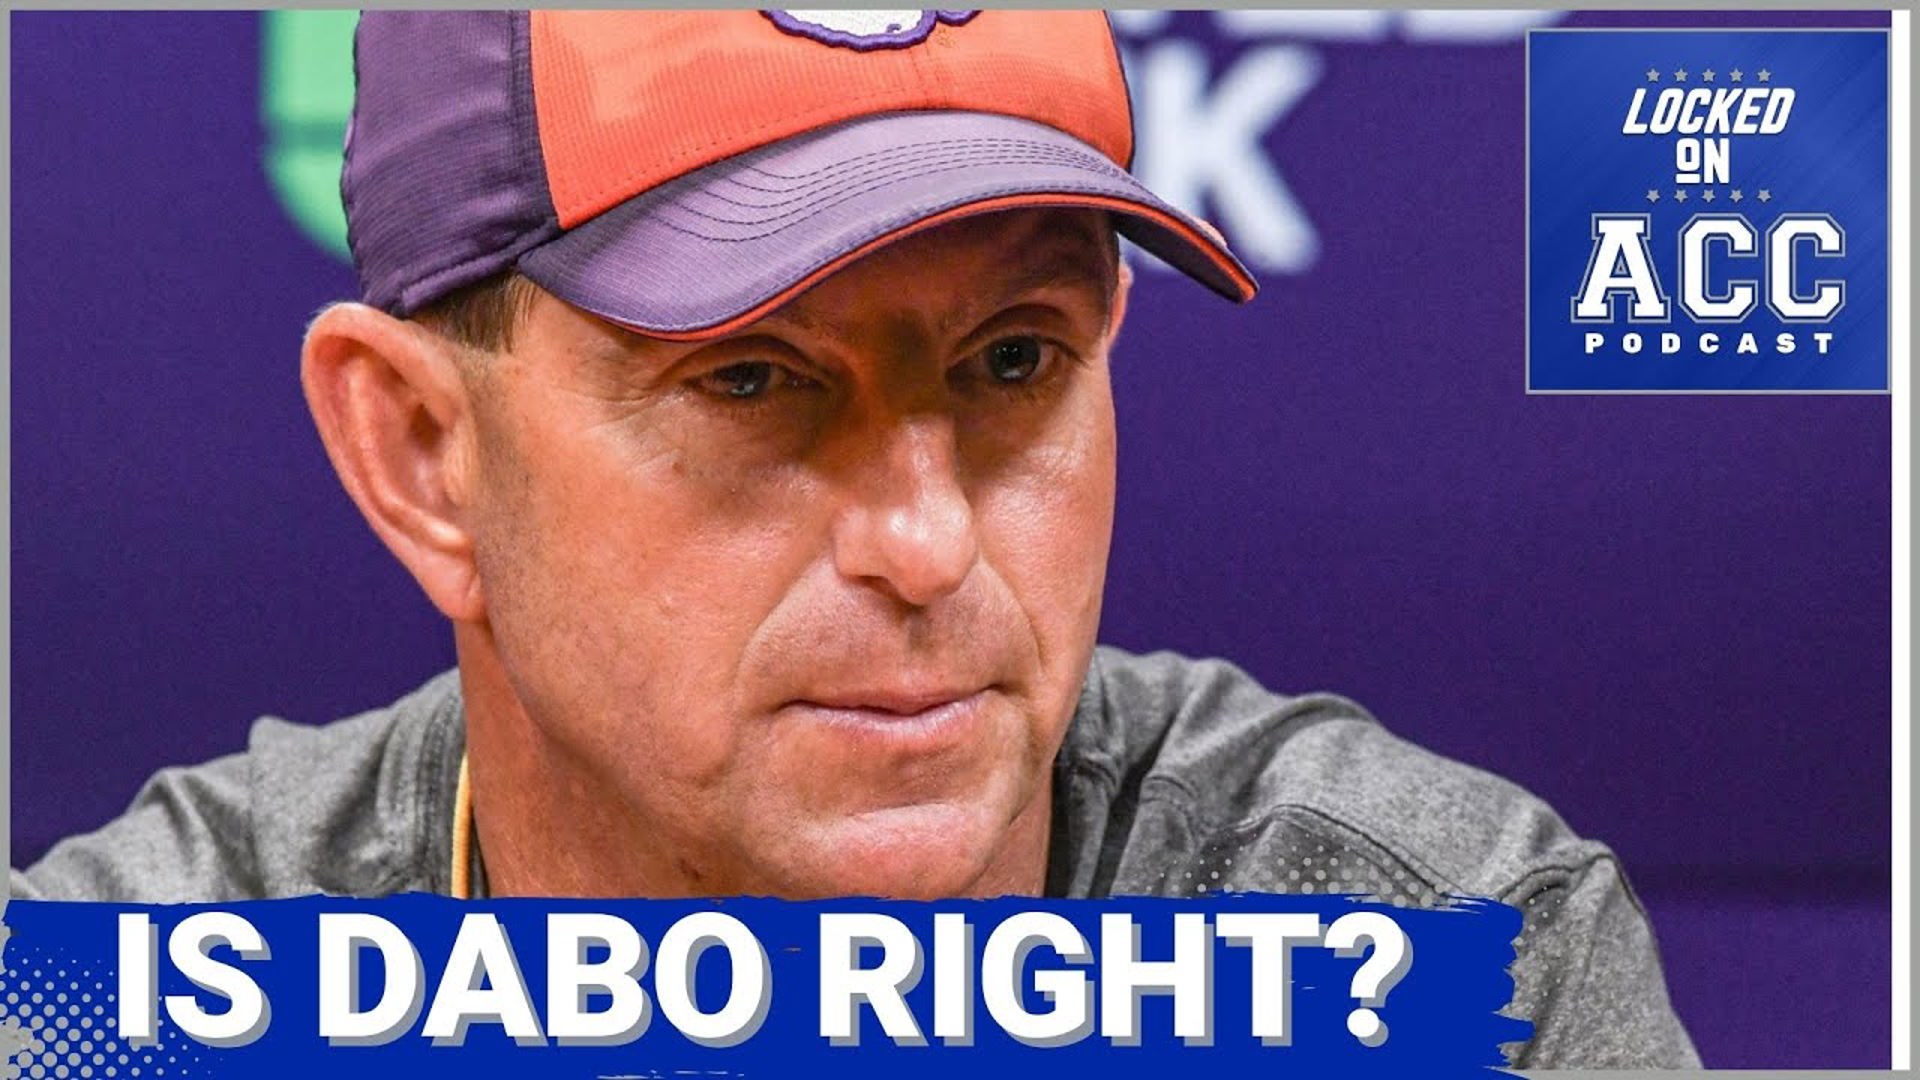 Dabo Swinney talked to Sirius XM radio about his Transfer Portal philosophy. Swinney has not taken in any transfer players for the Clemson Tigers.